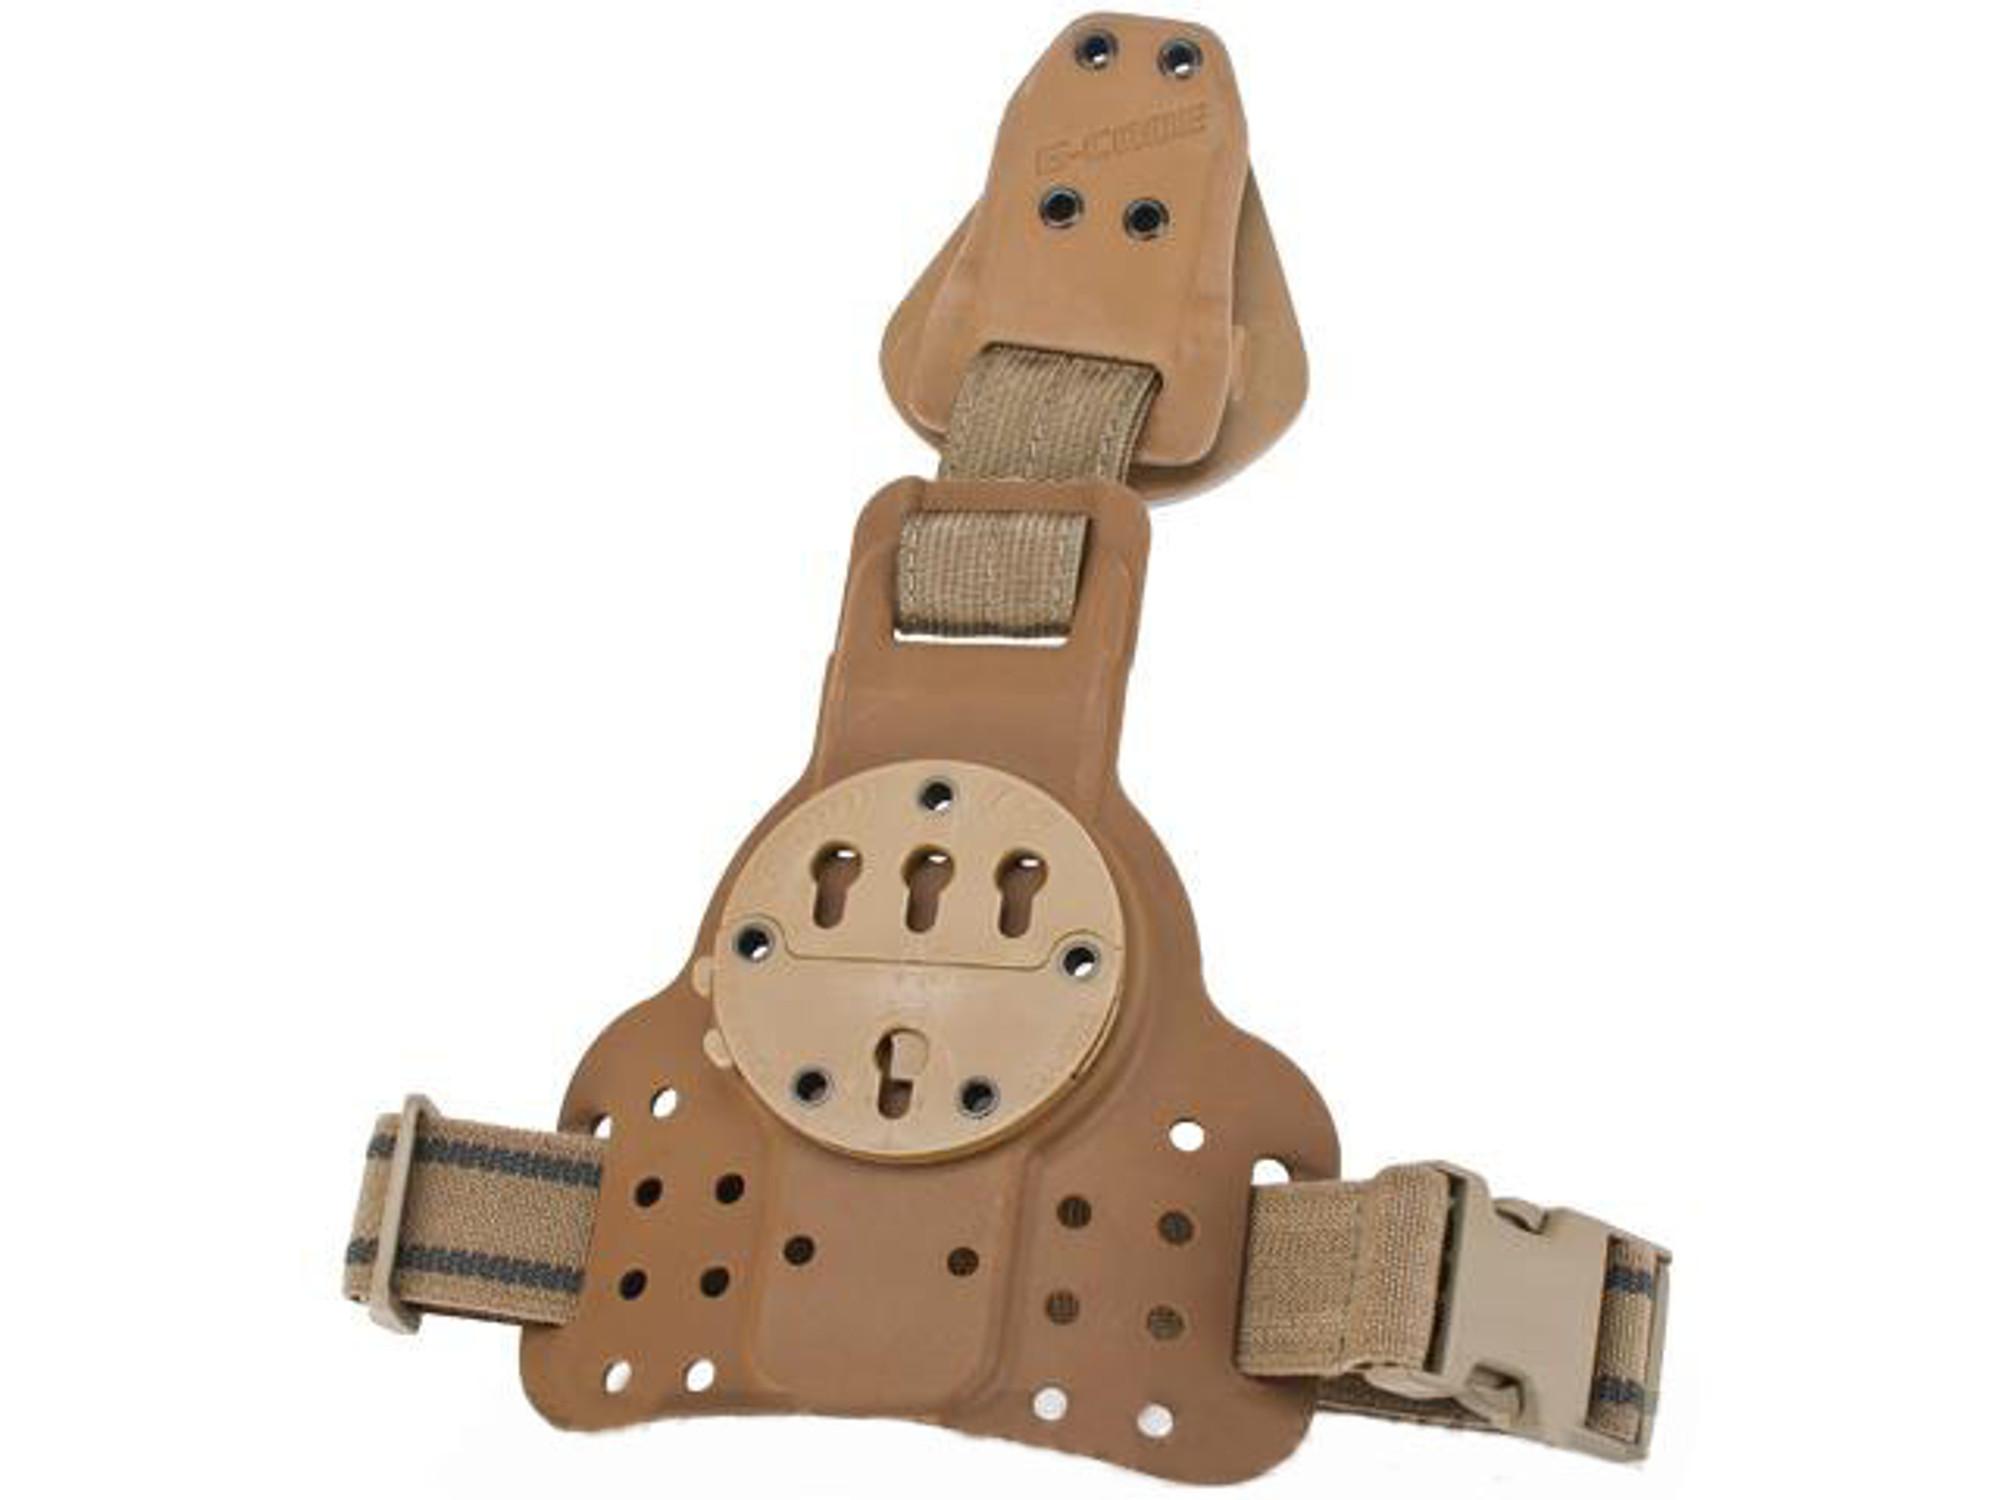 G-Code REAC RTI Tactical Kydex Drop Leg Holster Panel w/ Single Leg Strap - Coyote Brown